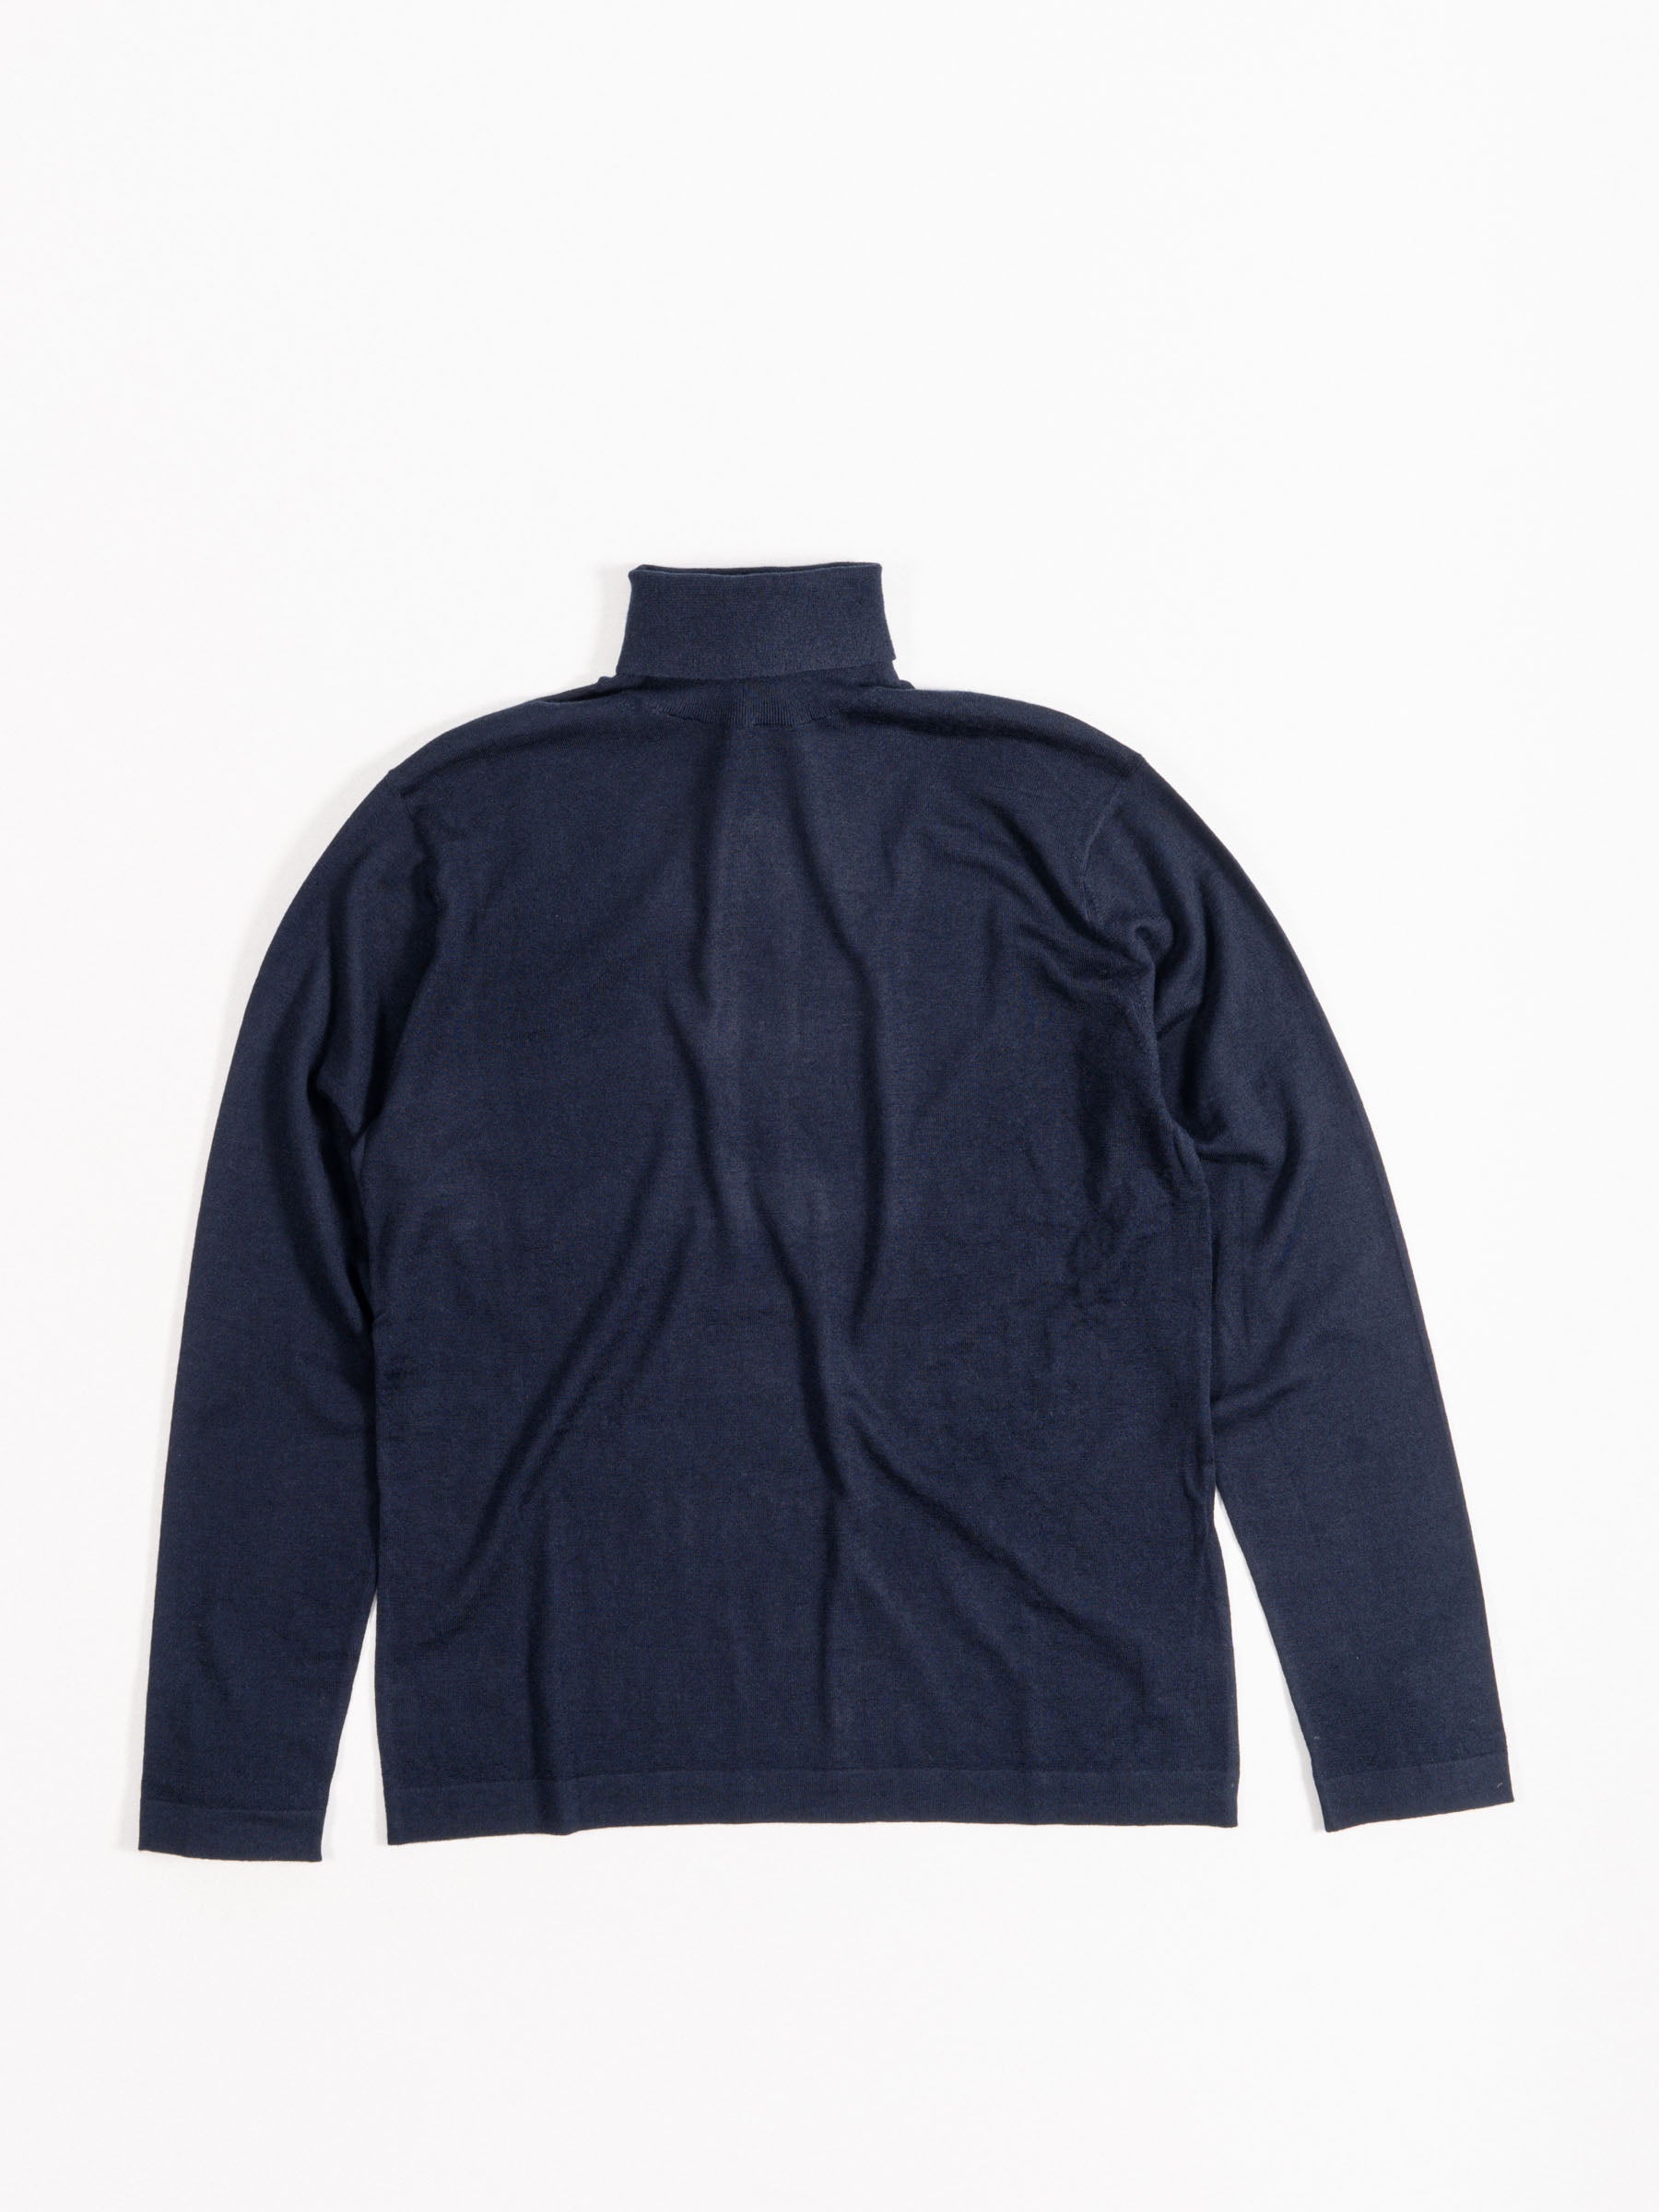 Wool Classic Rollerneck Sweater Navy Blue